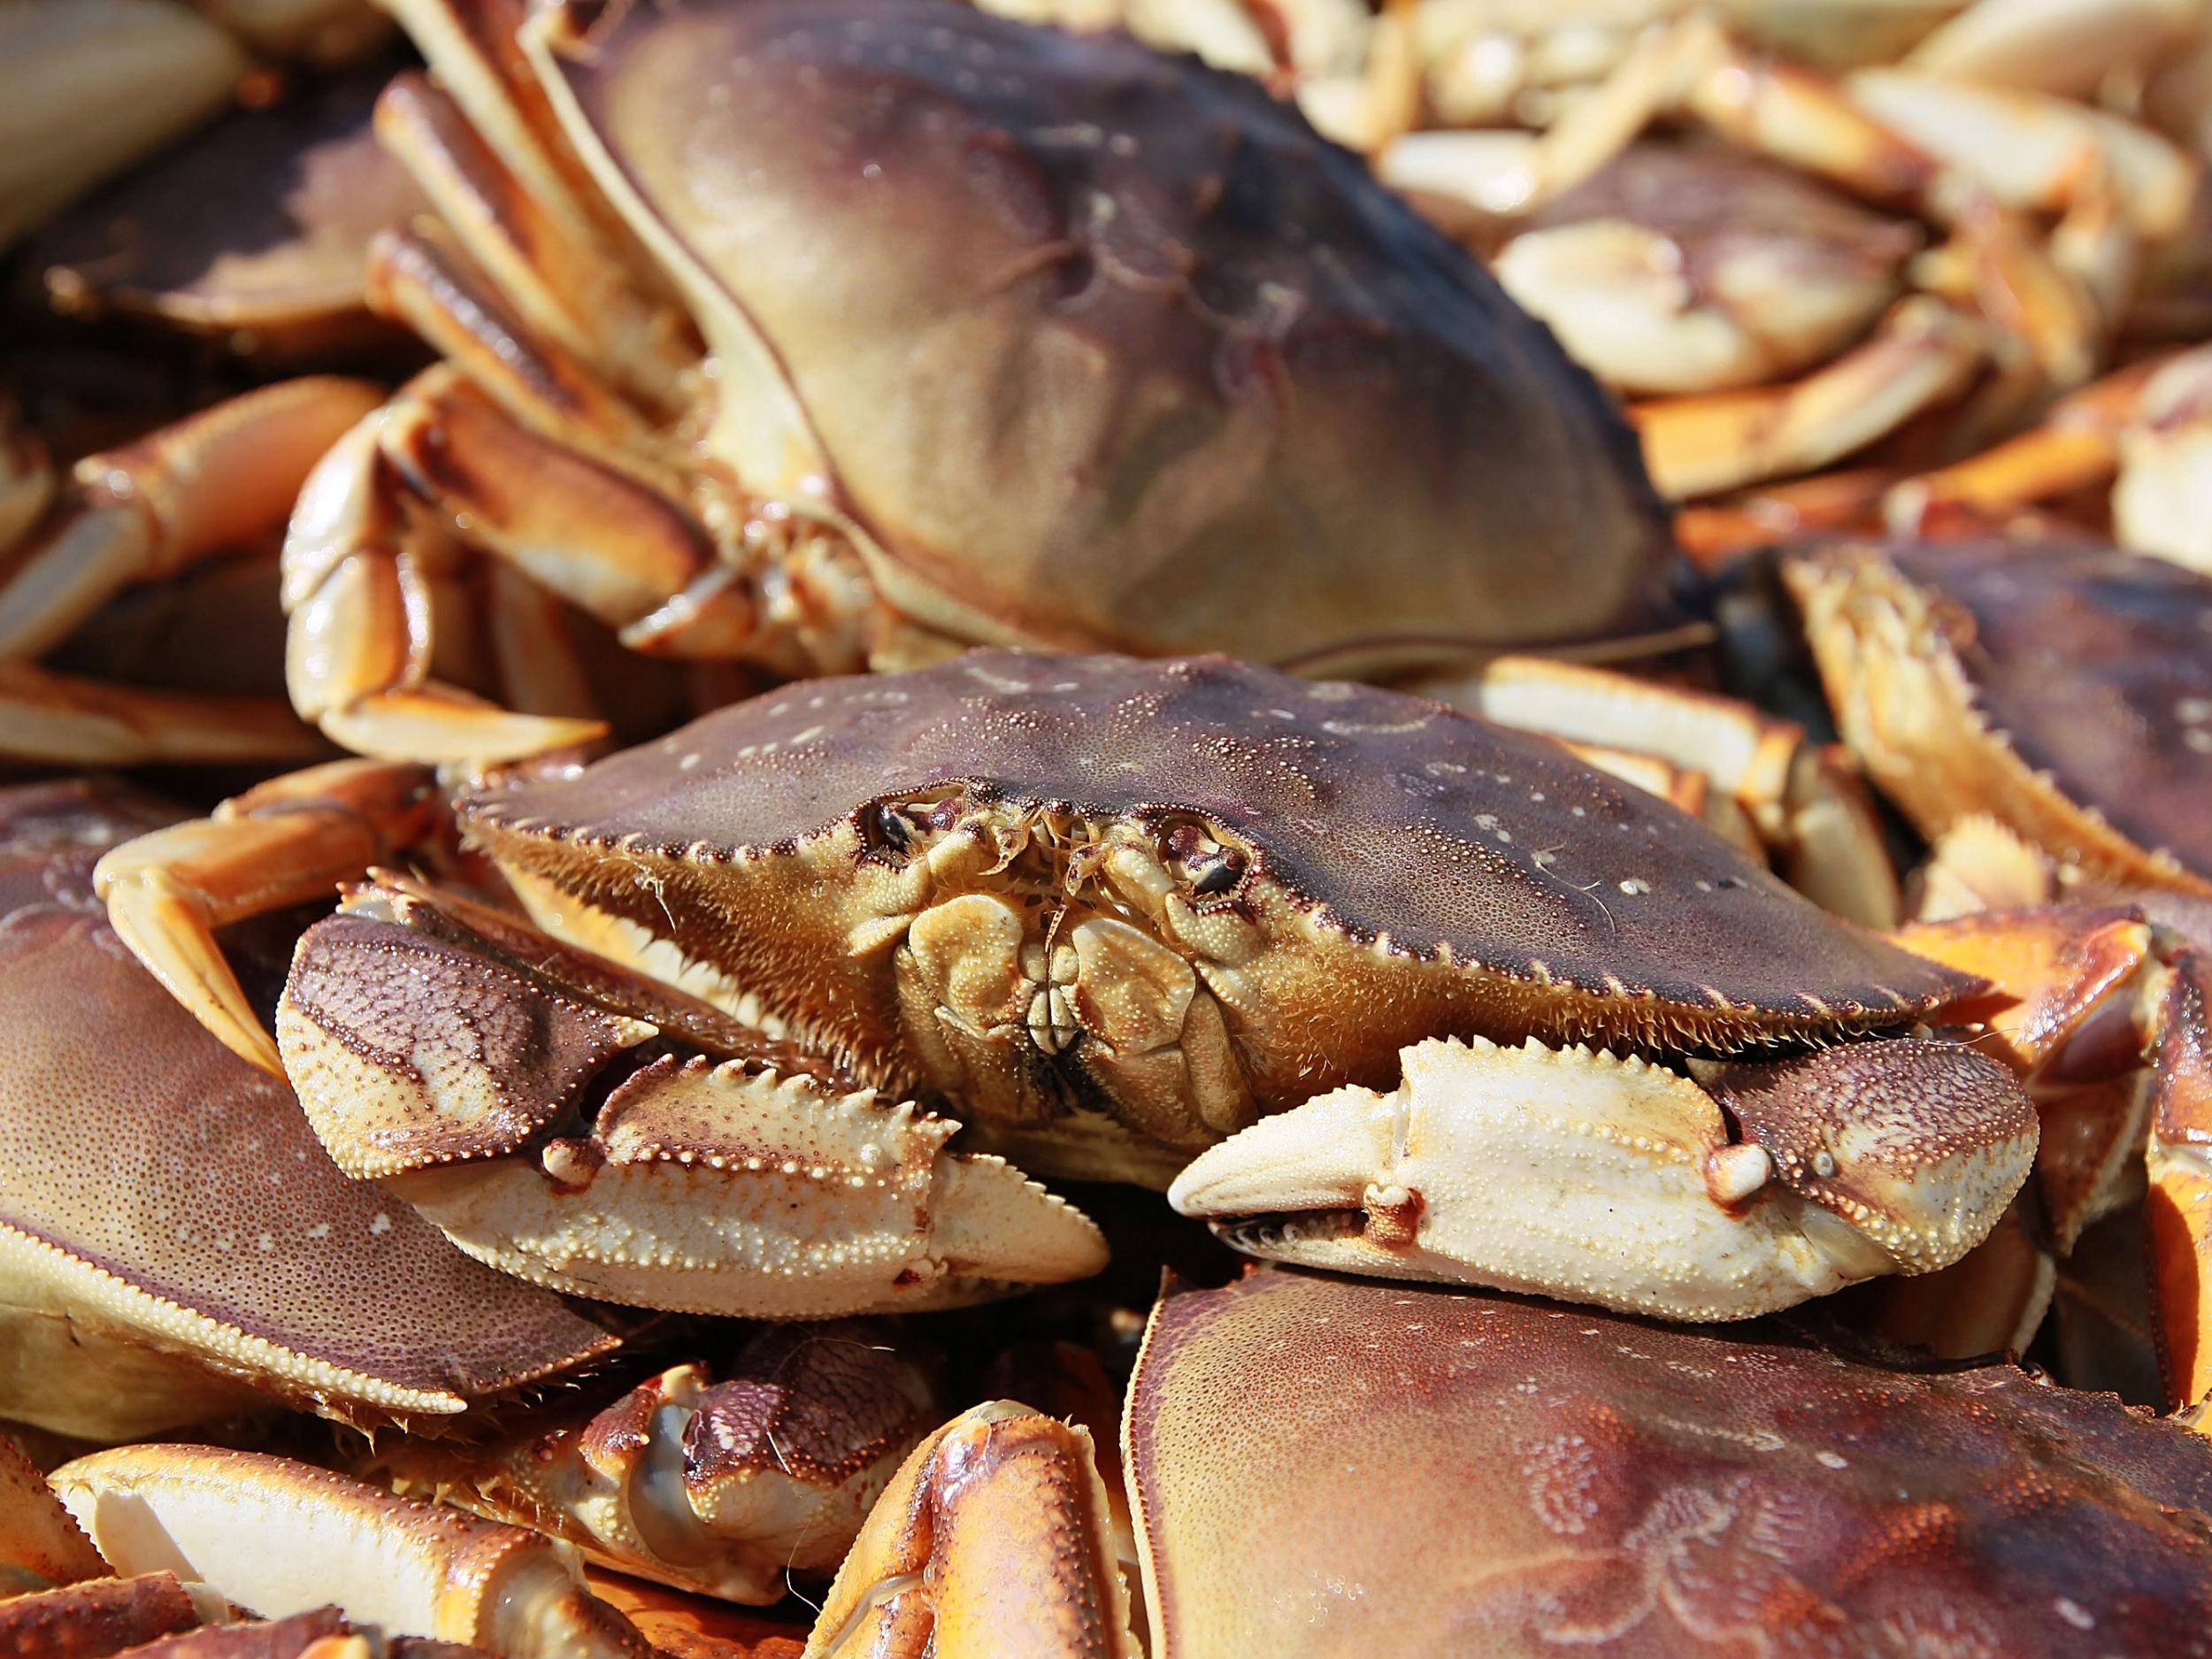 Supermarket criticised for selling live crabs wrapped in clingfilm